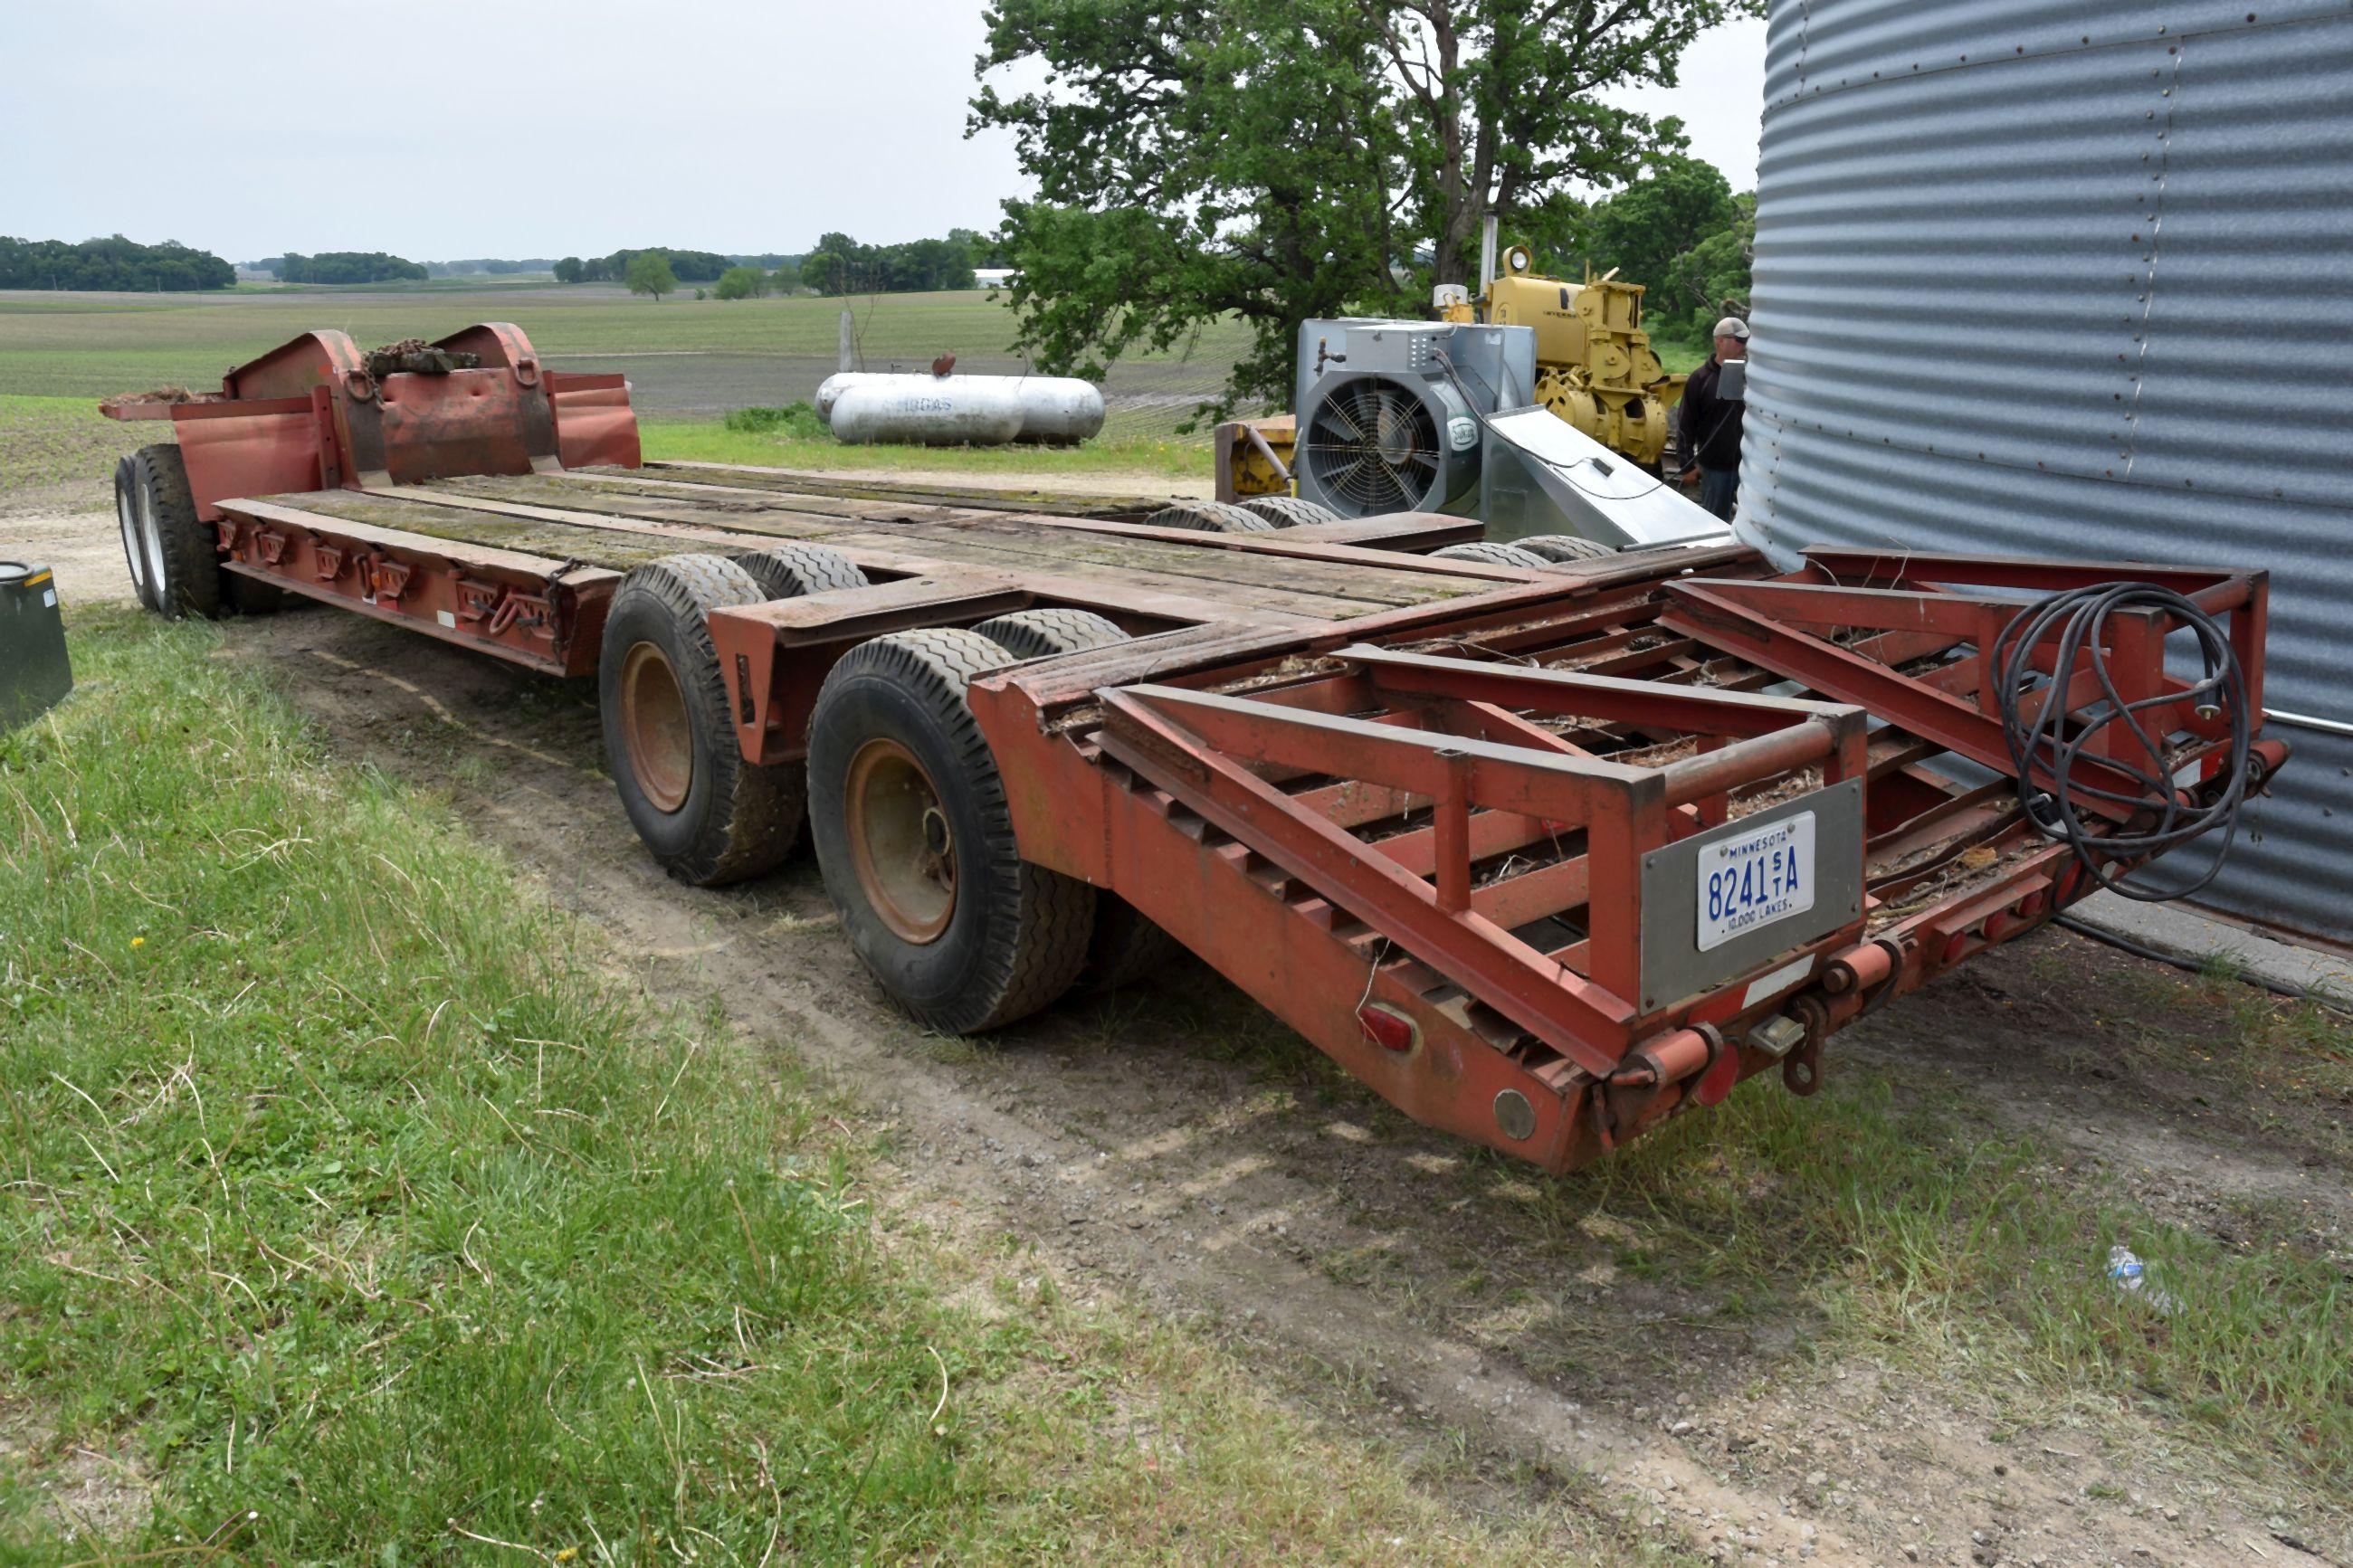 1965 Lo-Boy Semi Trailer With Front Dolly, Draw Bar Hitch, 23’ With 5’ Beaver Tail, Dolly Has Frozen